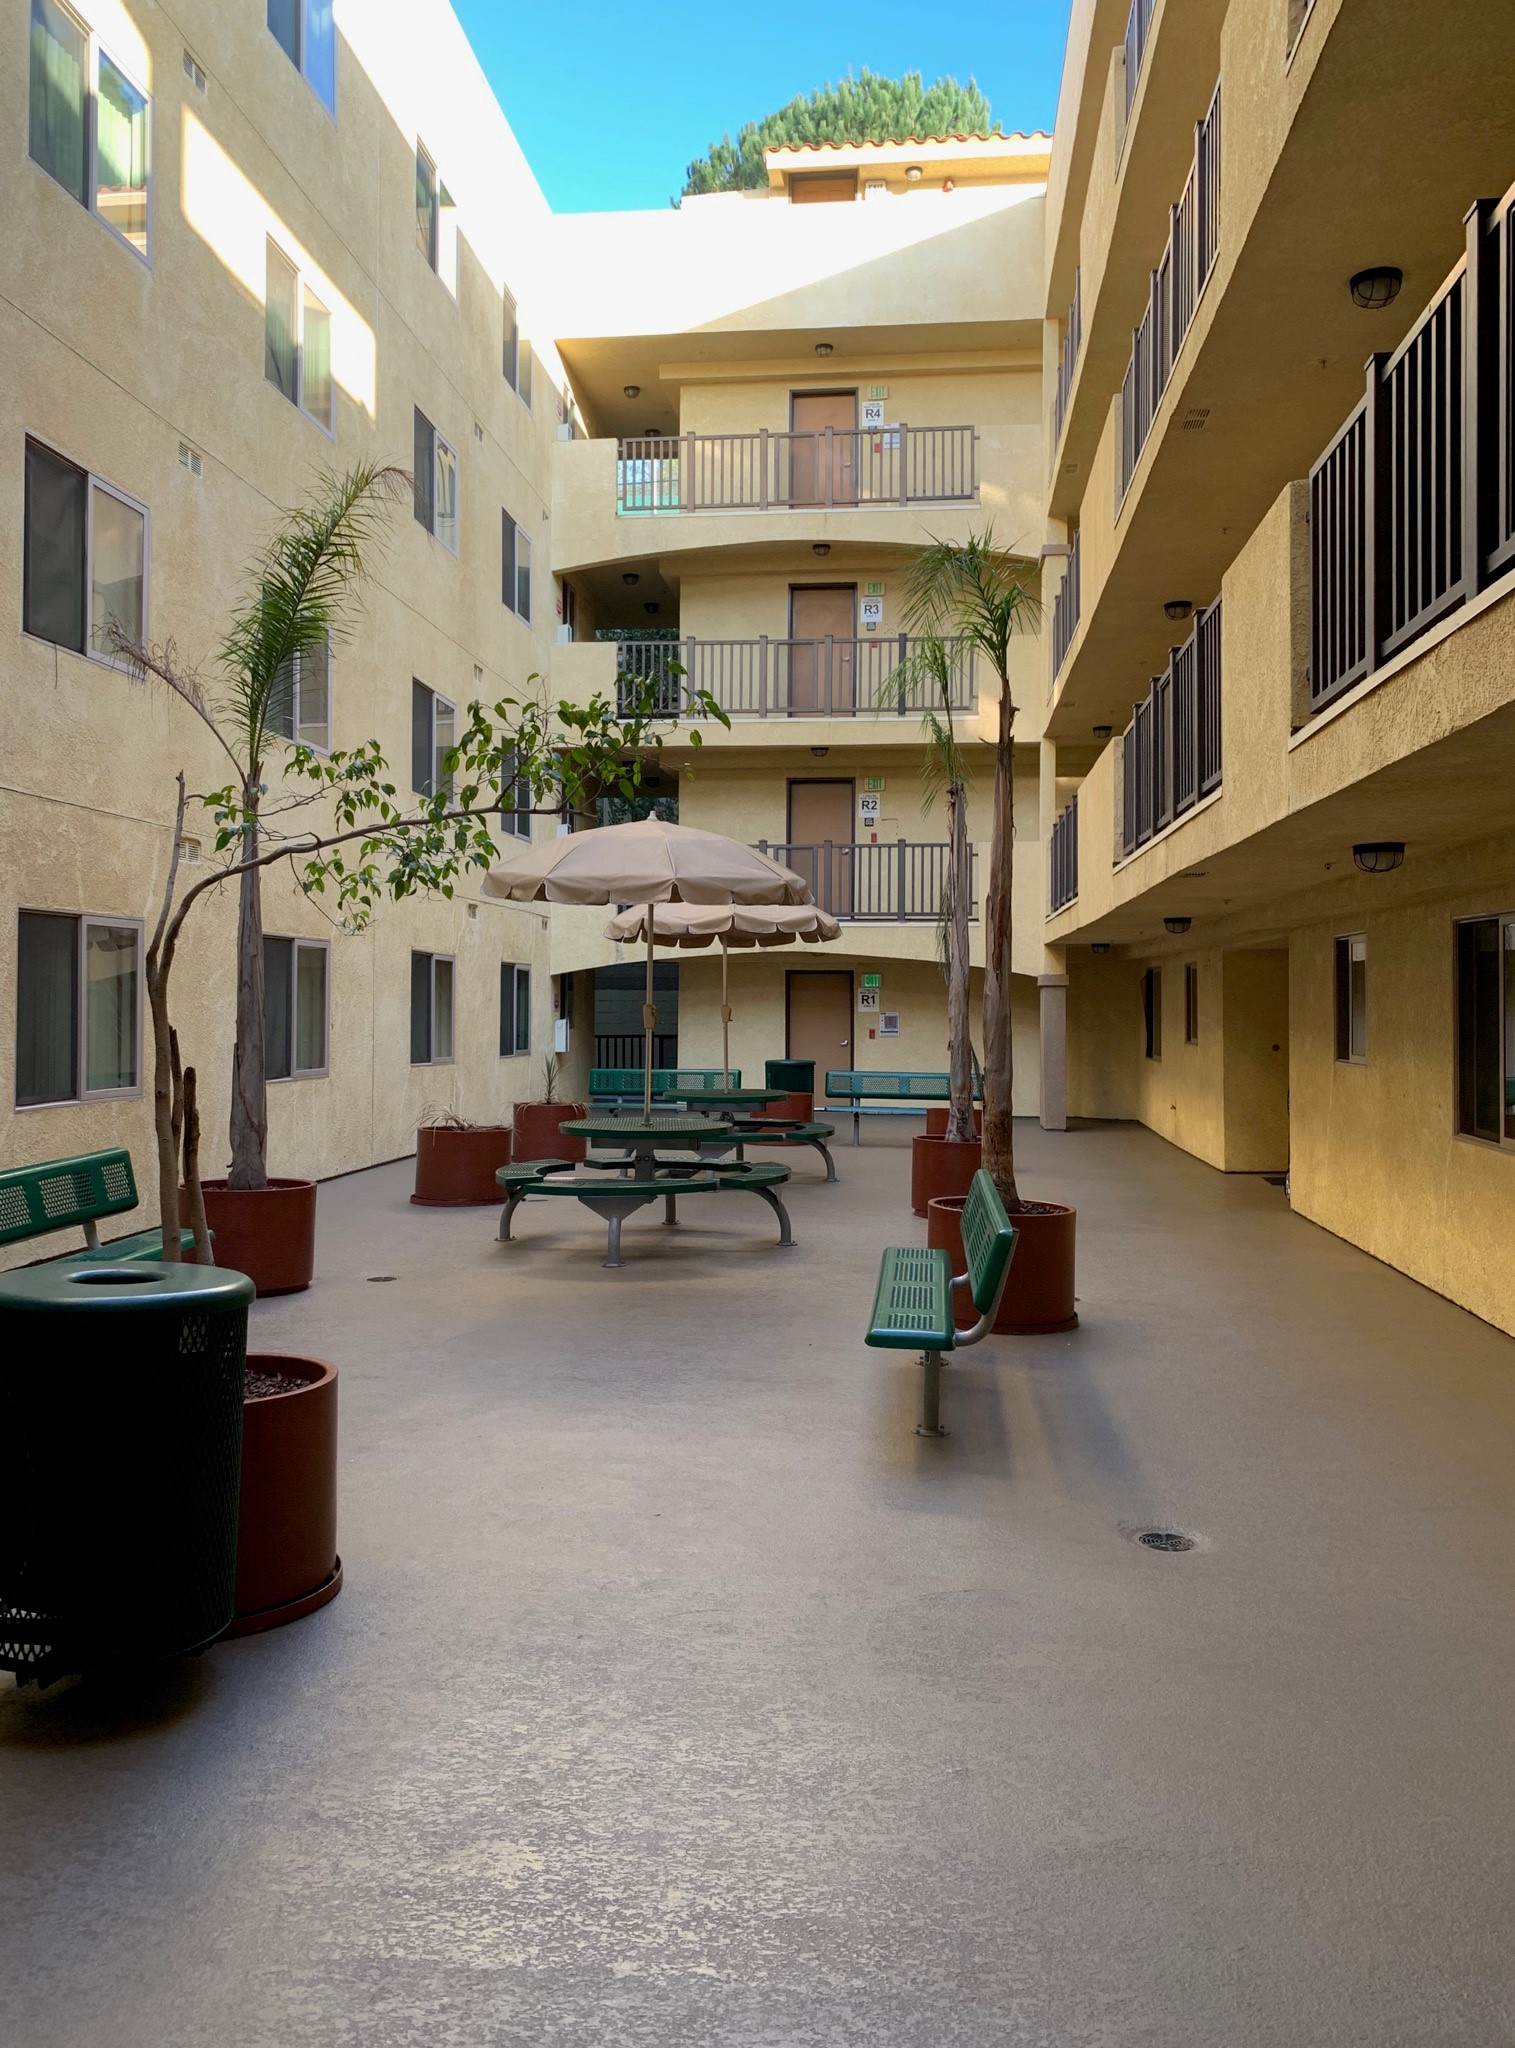 Courtyard that includes four becnhes and two round table benches with an umbrella. There is also newly planted trees in pots, and a trash bin. Area is located inside a four story building.